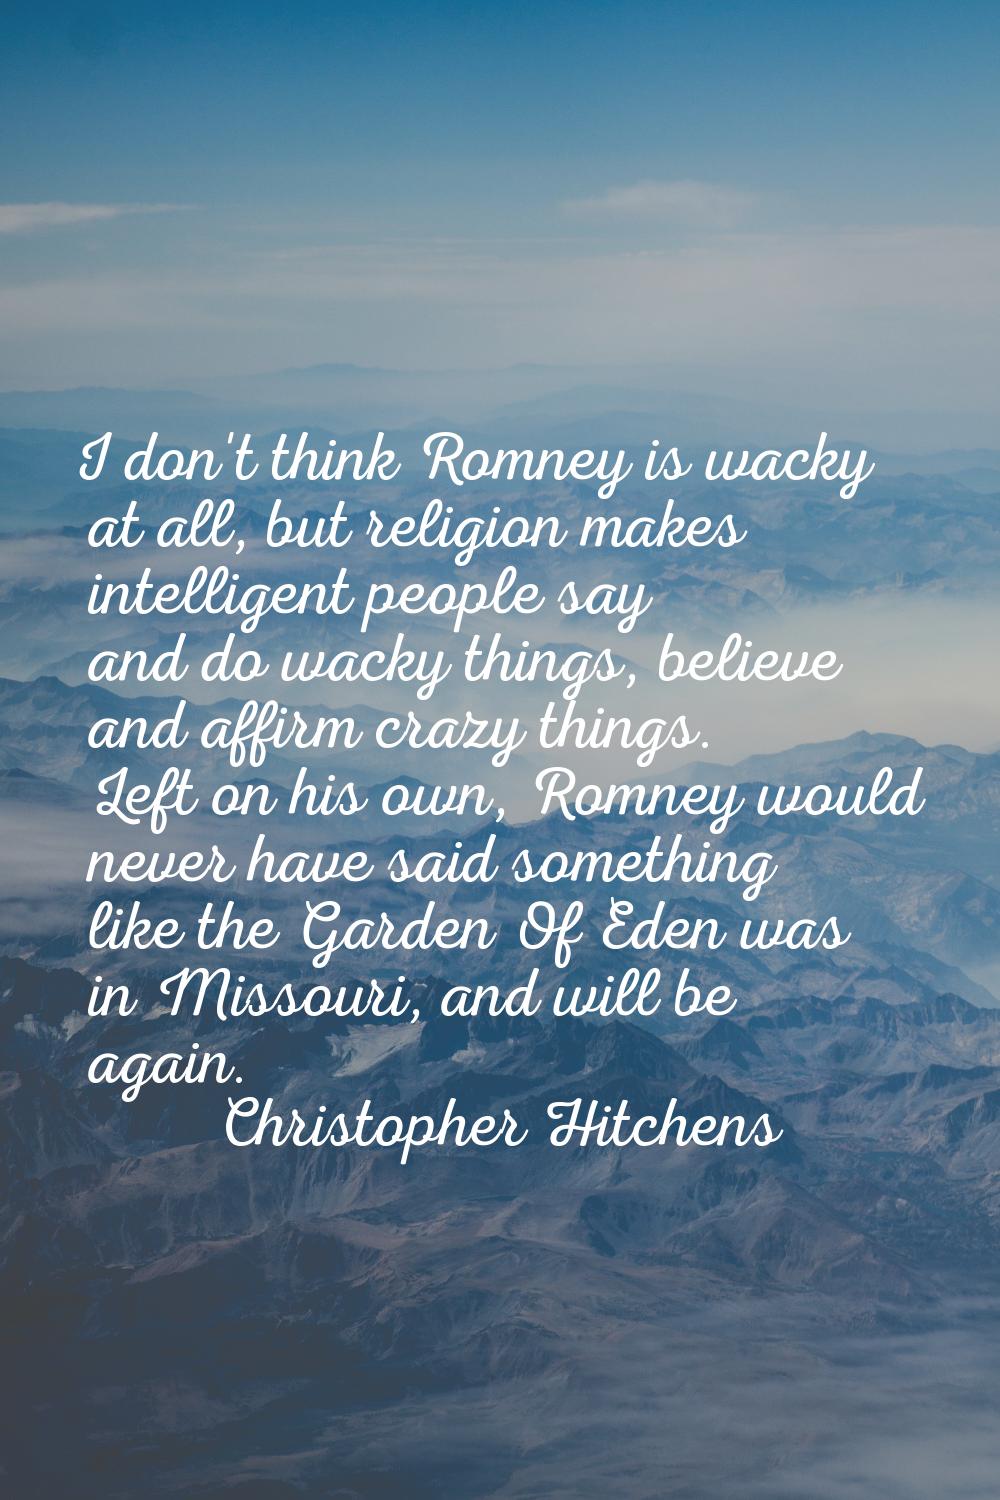 I don't think Romney is wacky at all, but religion makes intelligent people say and do wacky things